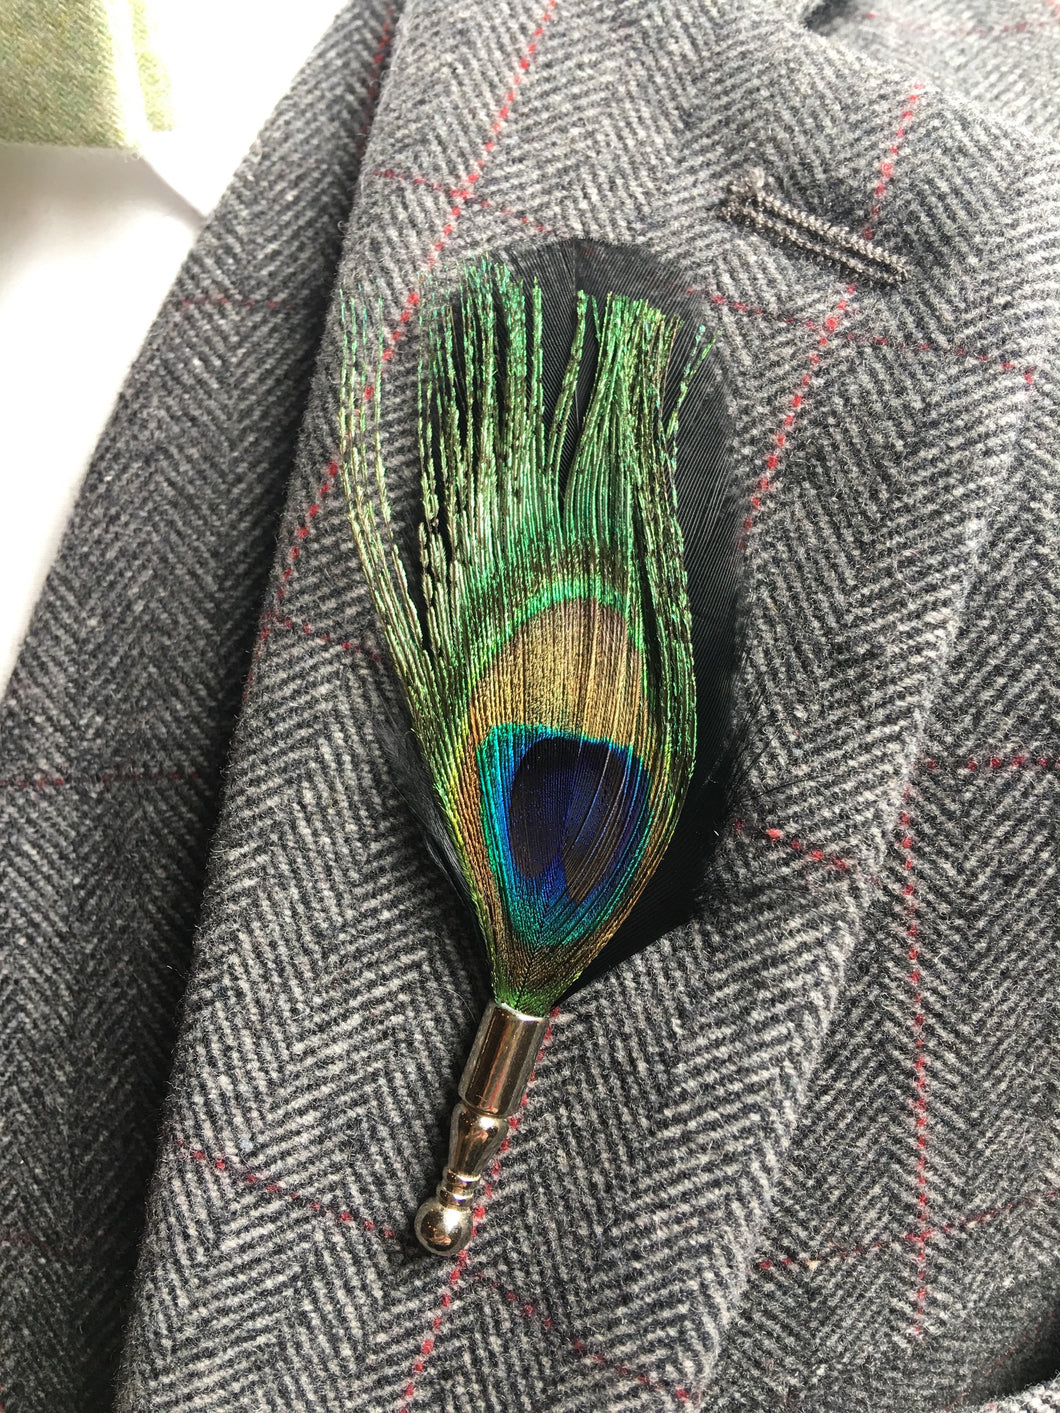 Peacock Feather Lapel Pin